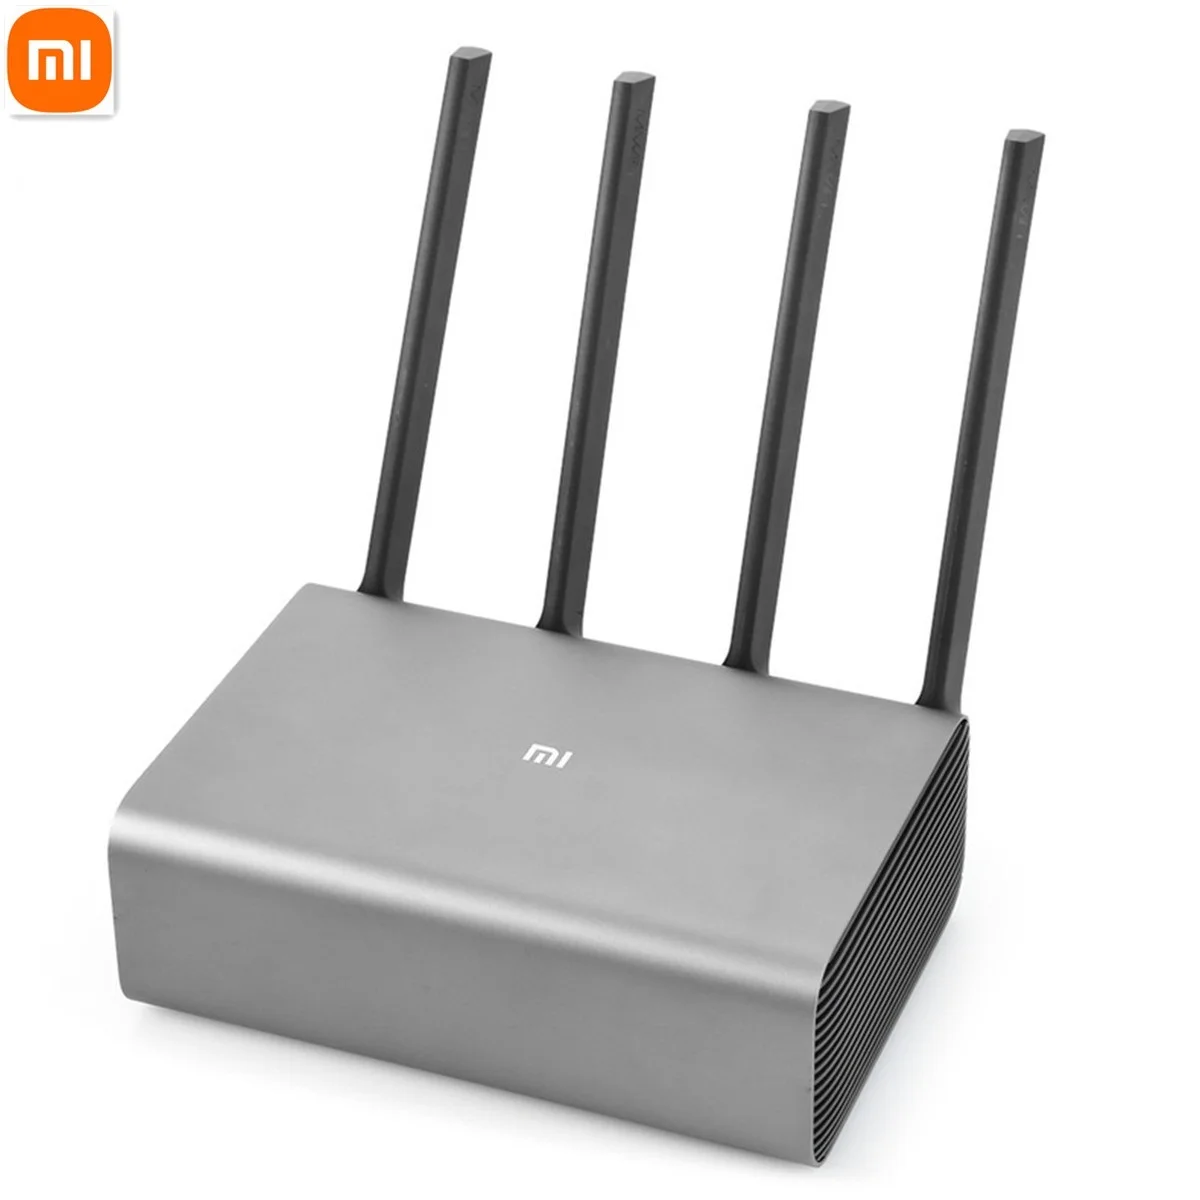 

80% New Xiaomi Mi Router Pro R3P 2600Mbps WiFI Smart Wireless Router 4 Antenna Dual Band 2.4GHz 5.0GHz Wifi Network Device